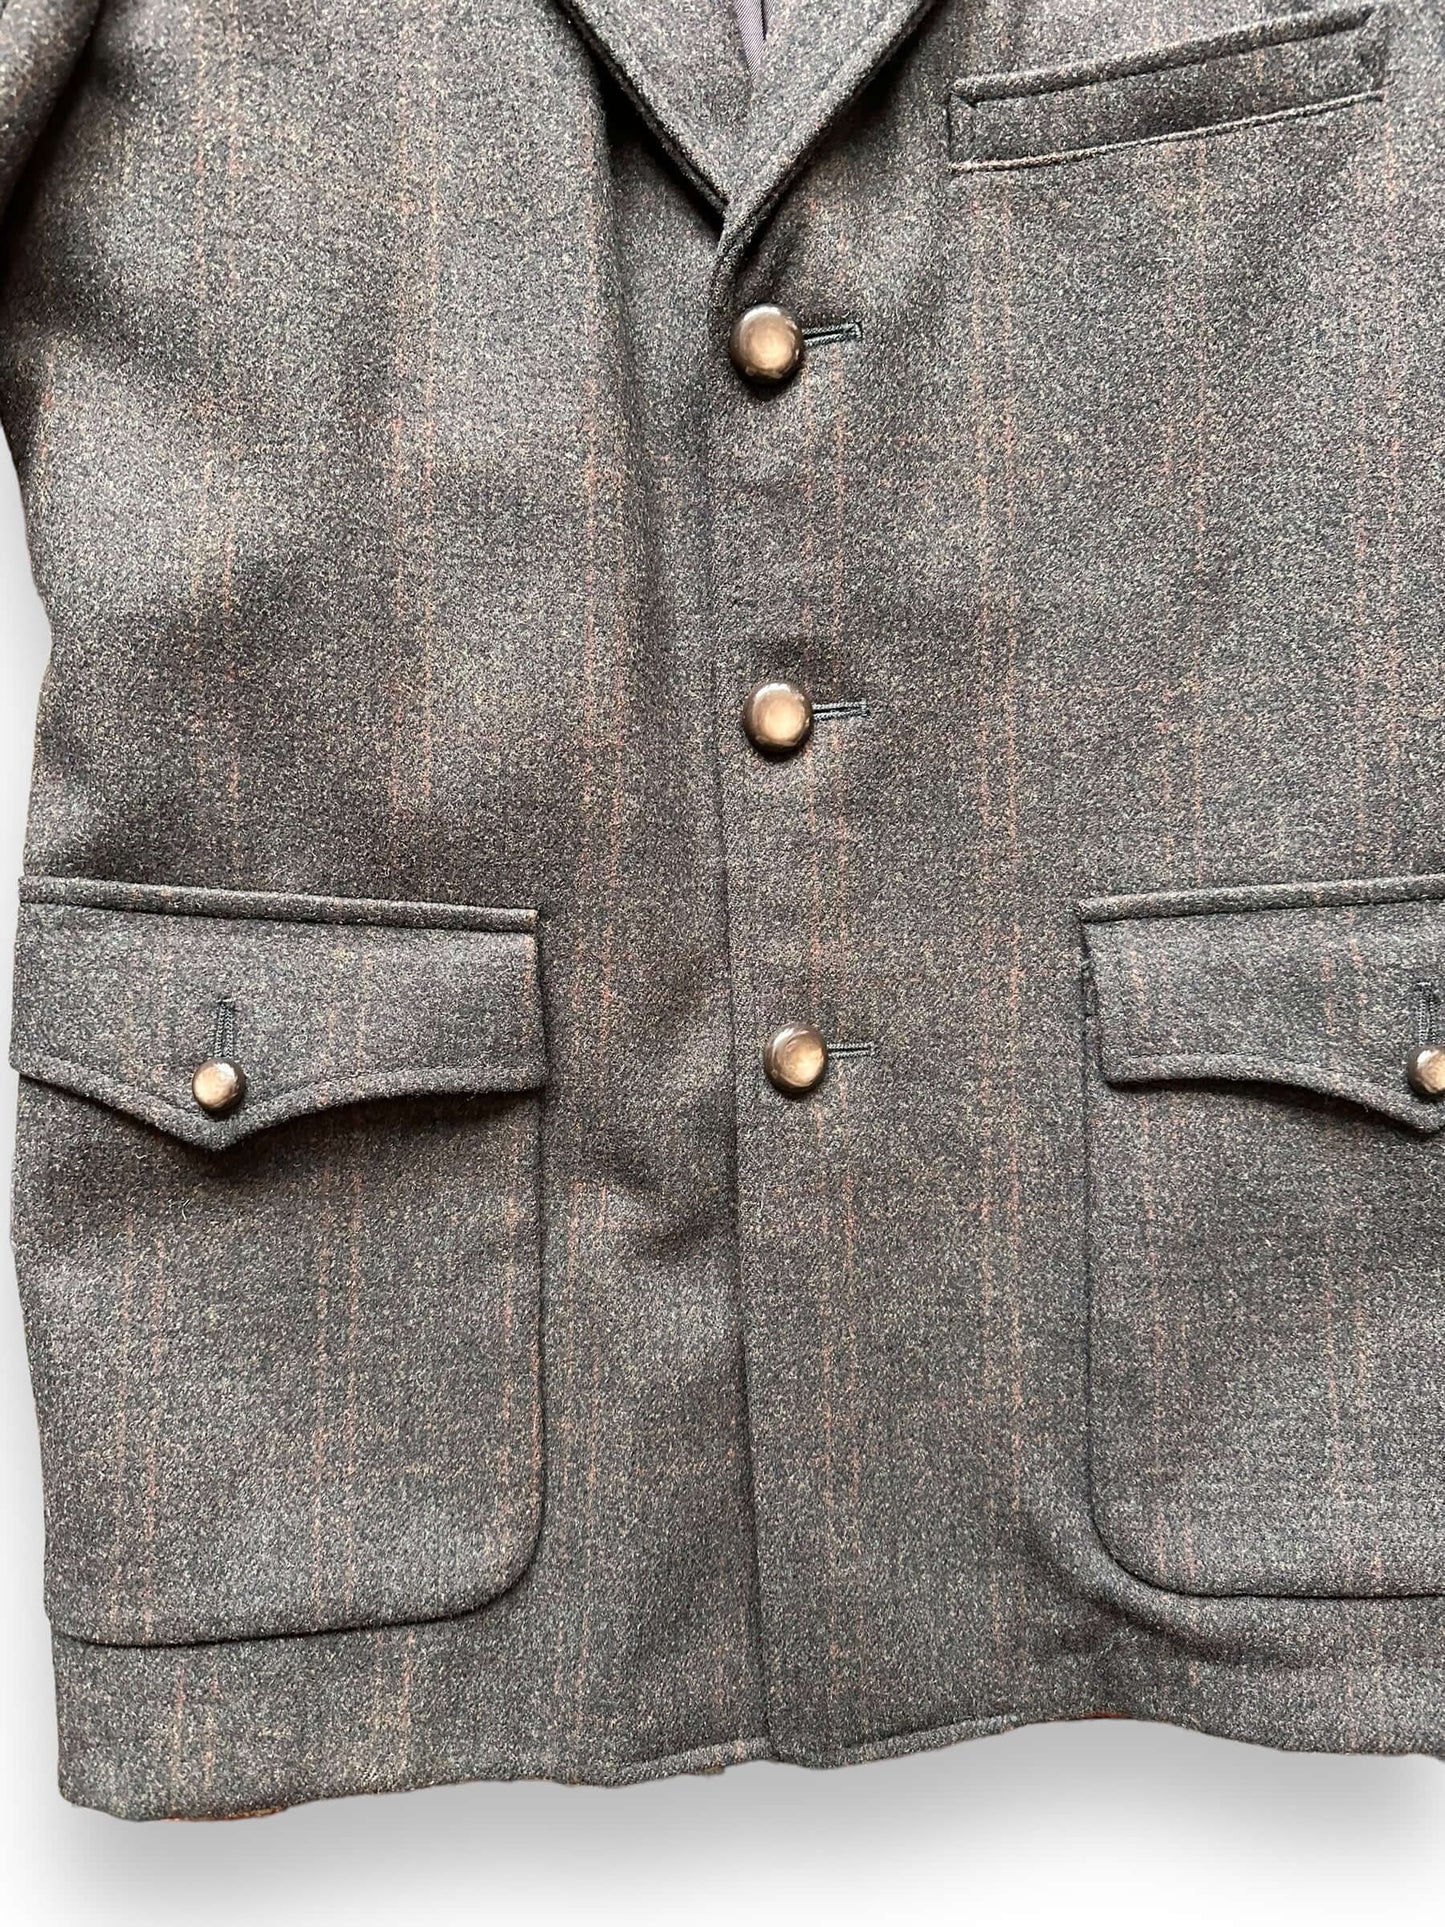 Lower Front View of Vintage Field & Stream Wool Jacket SZ 36 | Vintage Wool Jacket Seattle  | Seattle Vintage Clothing